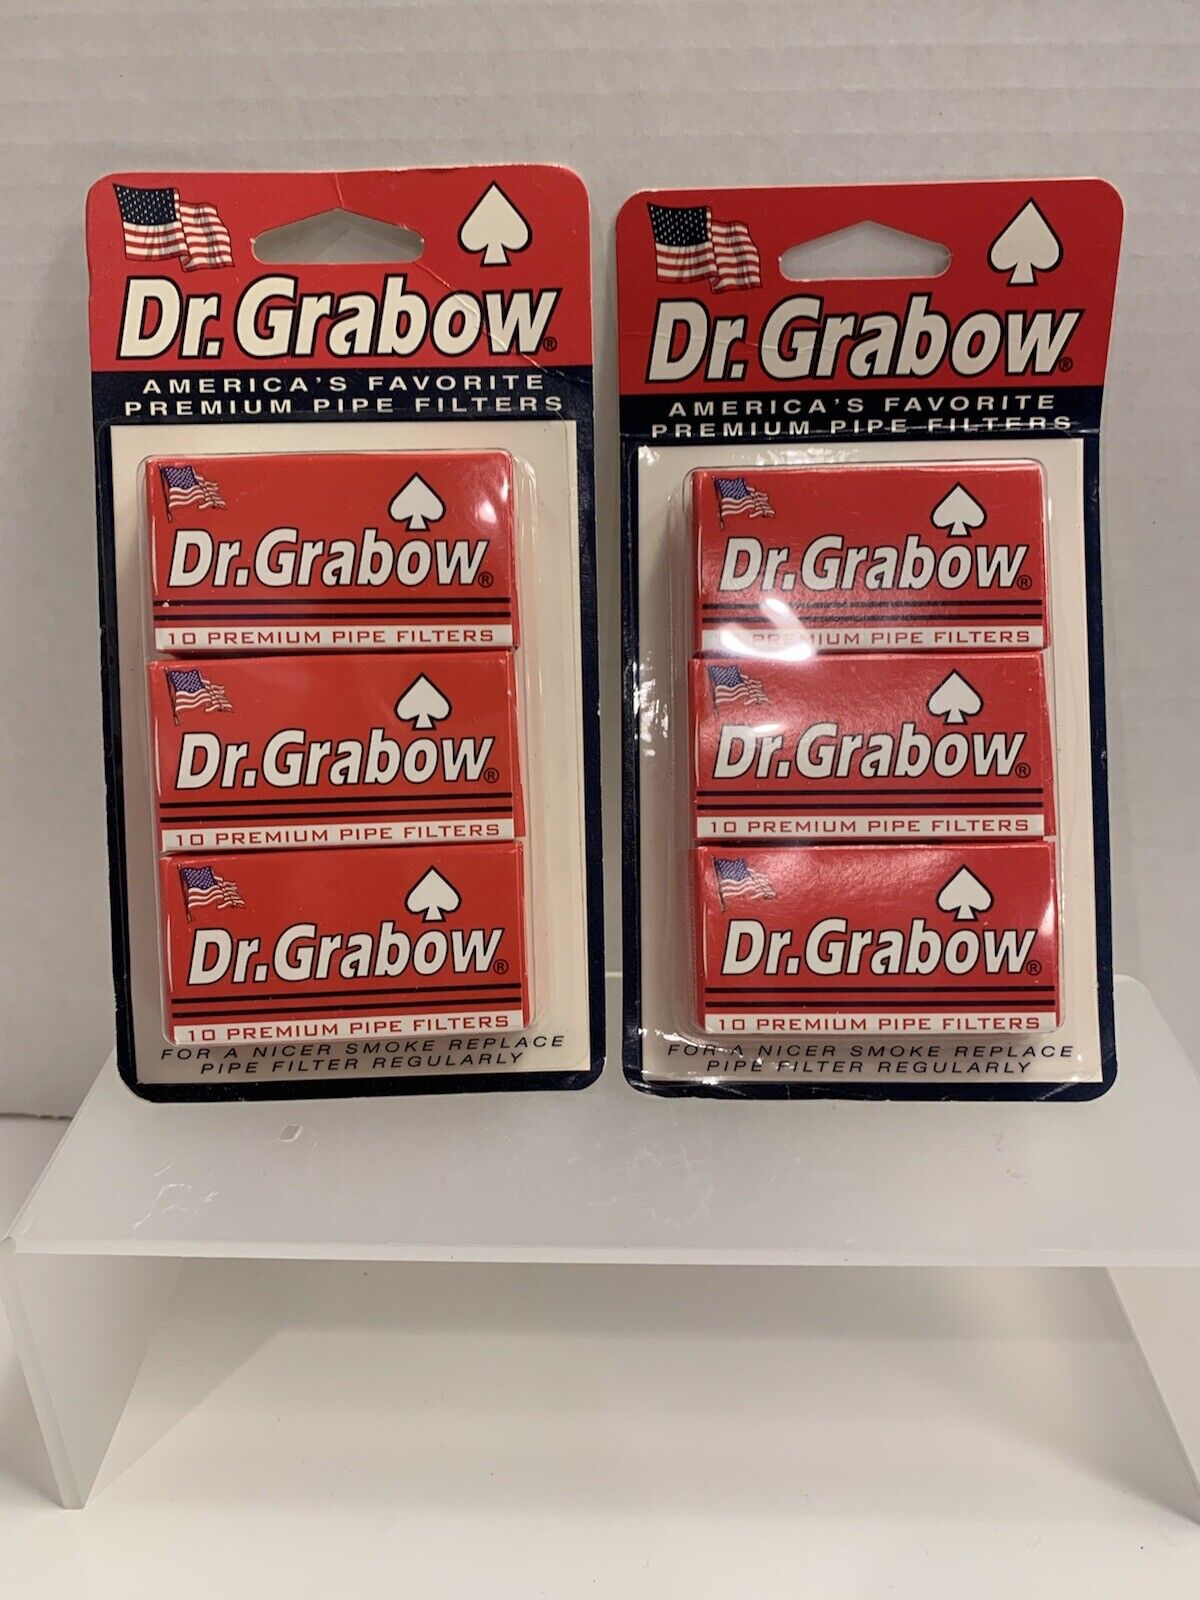 Dr. Grabow Premium Pipe Filters - 6 boxes of 10 each.  Total 60 Filters